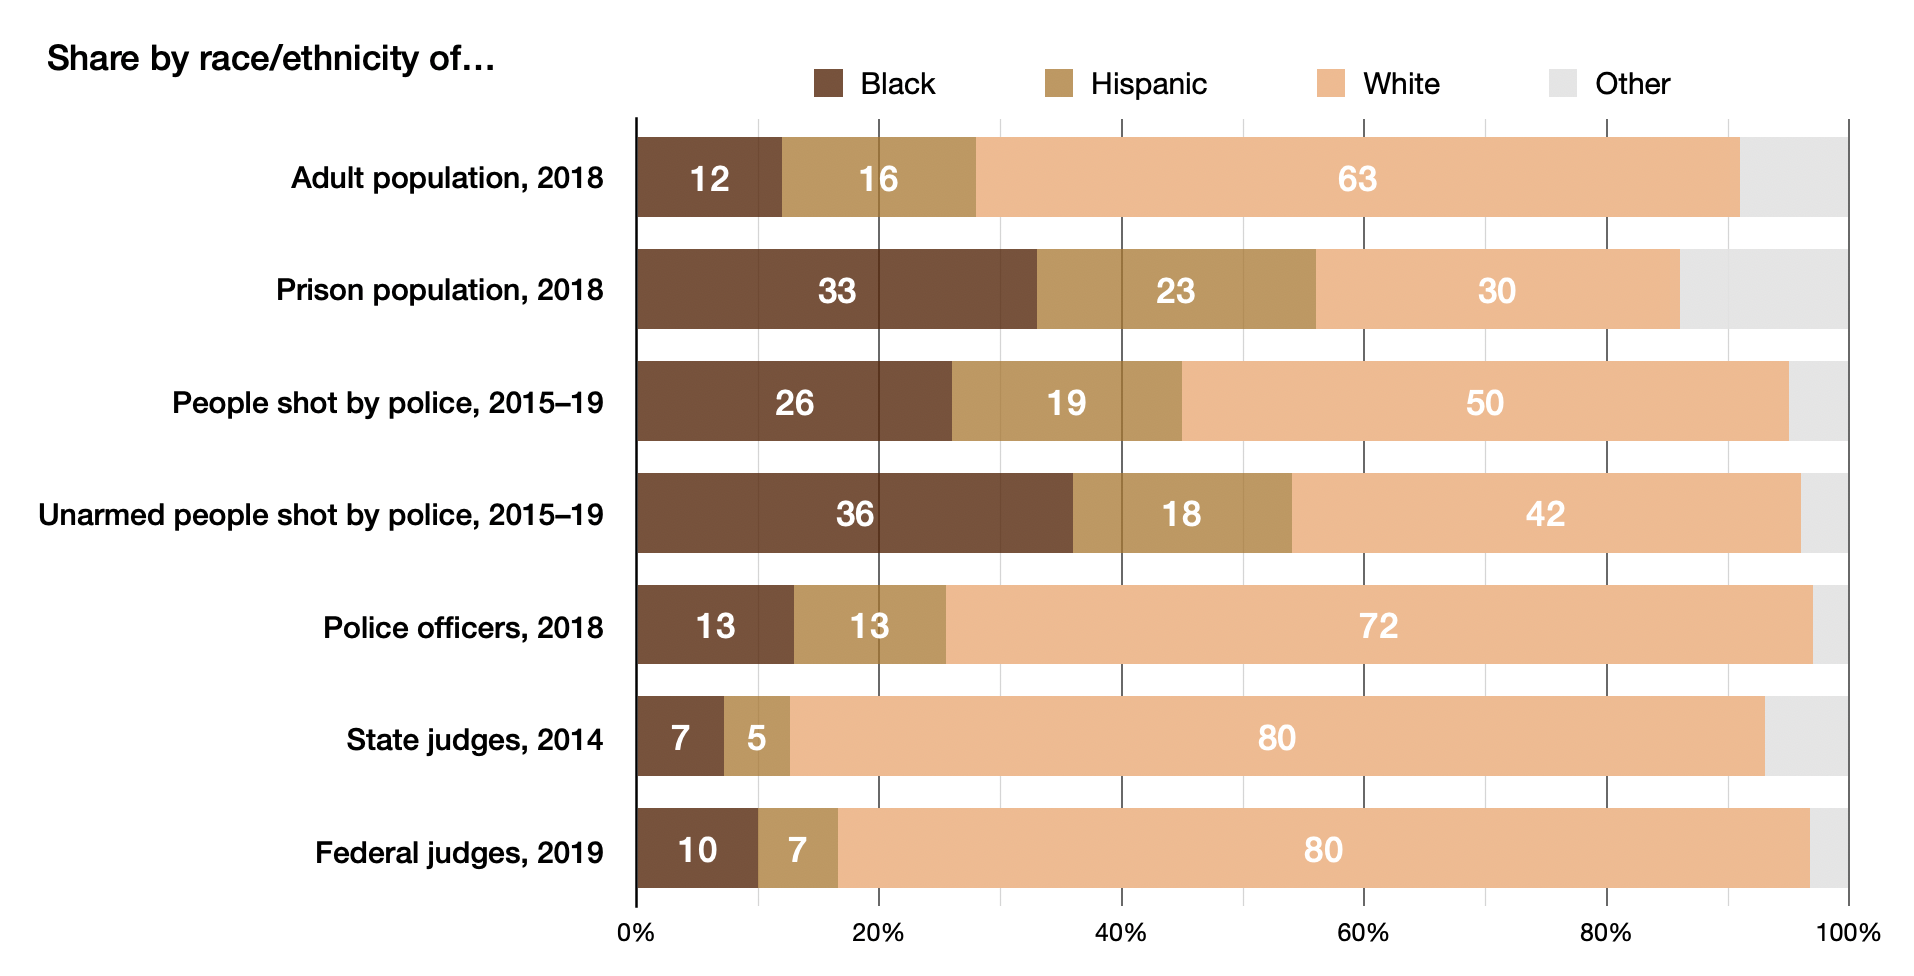 Race_disparities_in_US_criminal_justice_system%2C_late_2010s.png